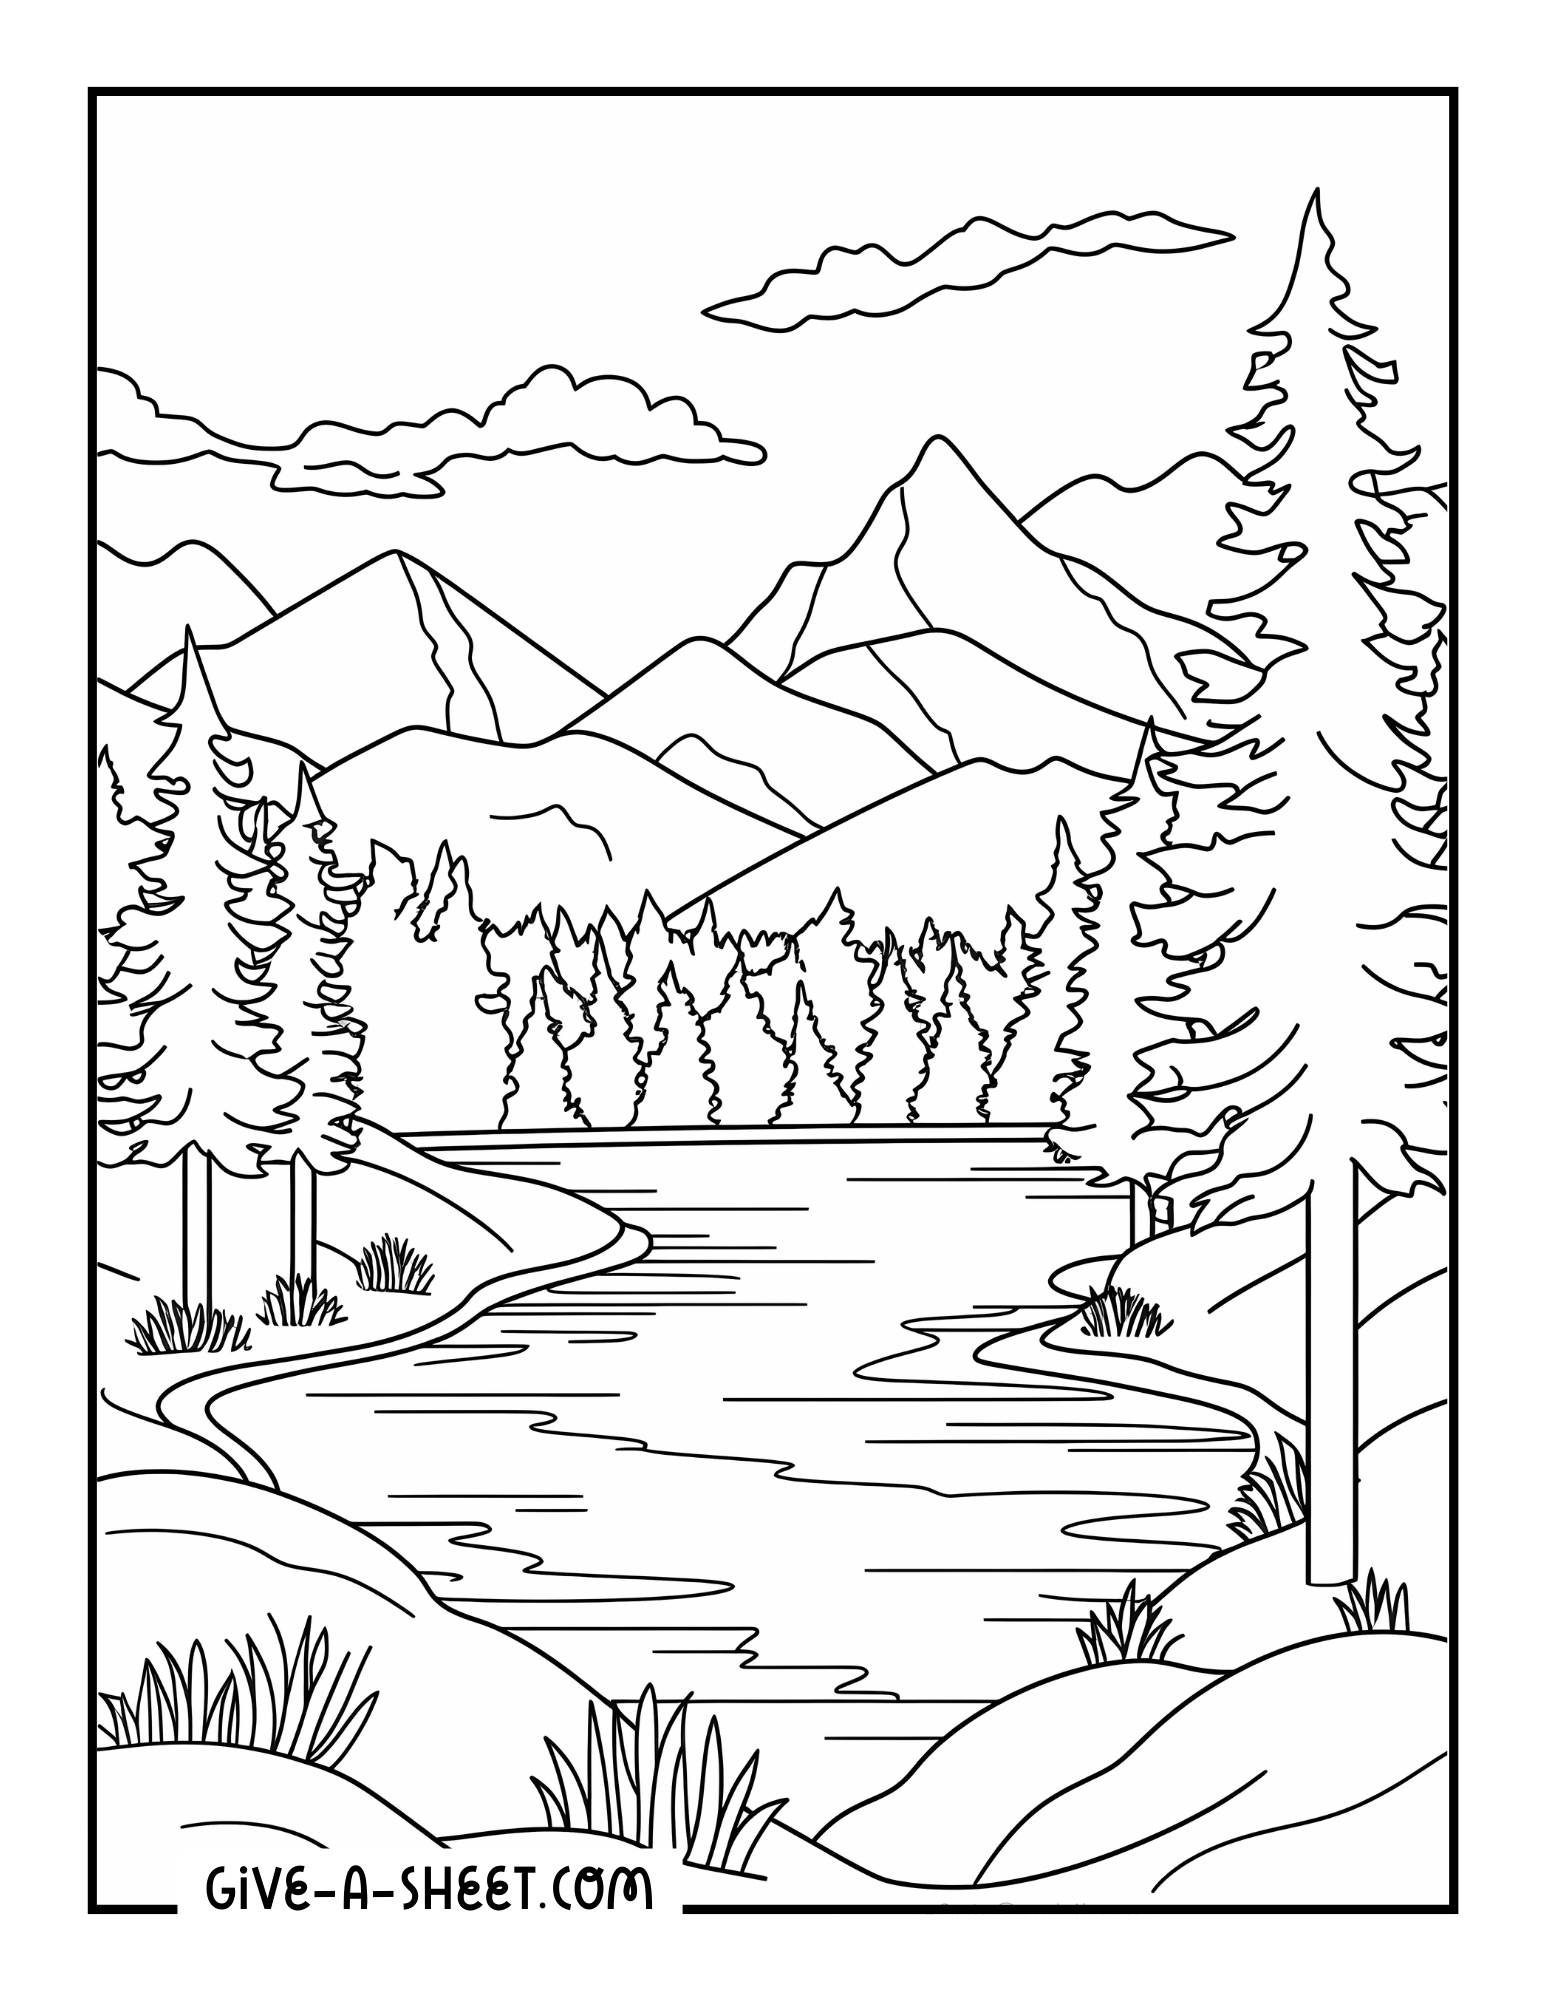 Red pine tree coloring page for adults.